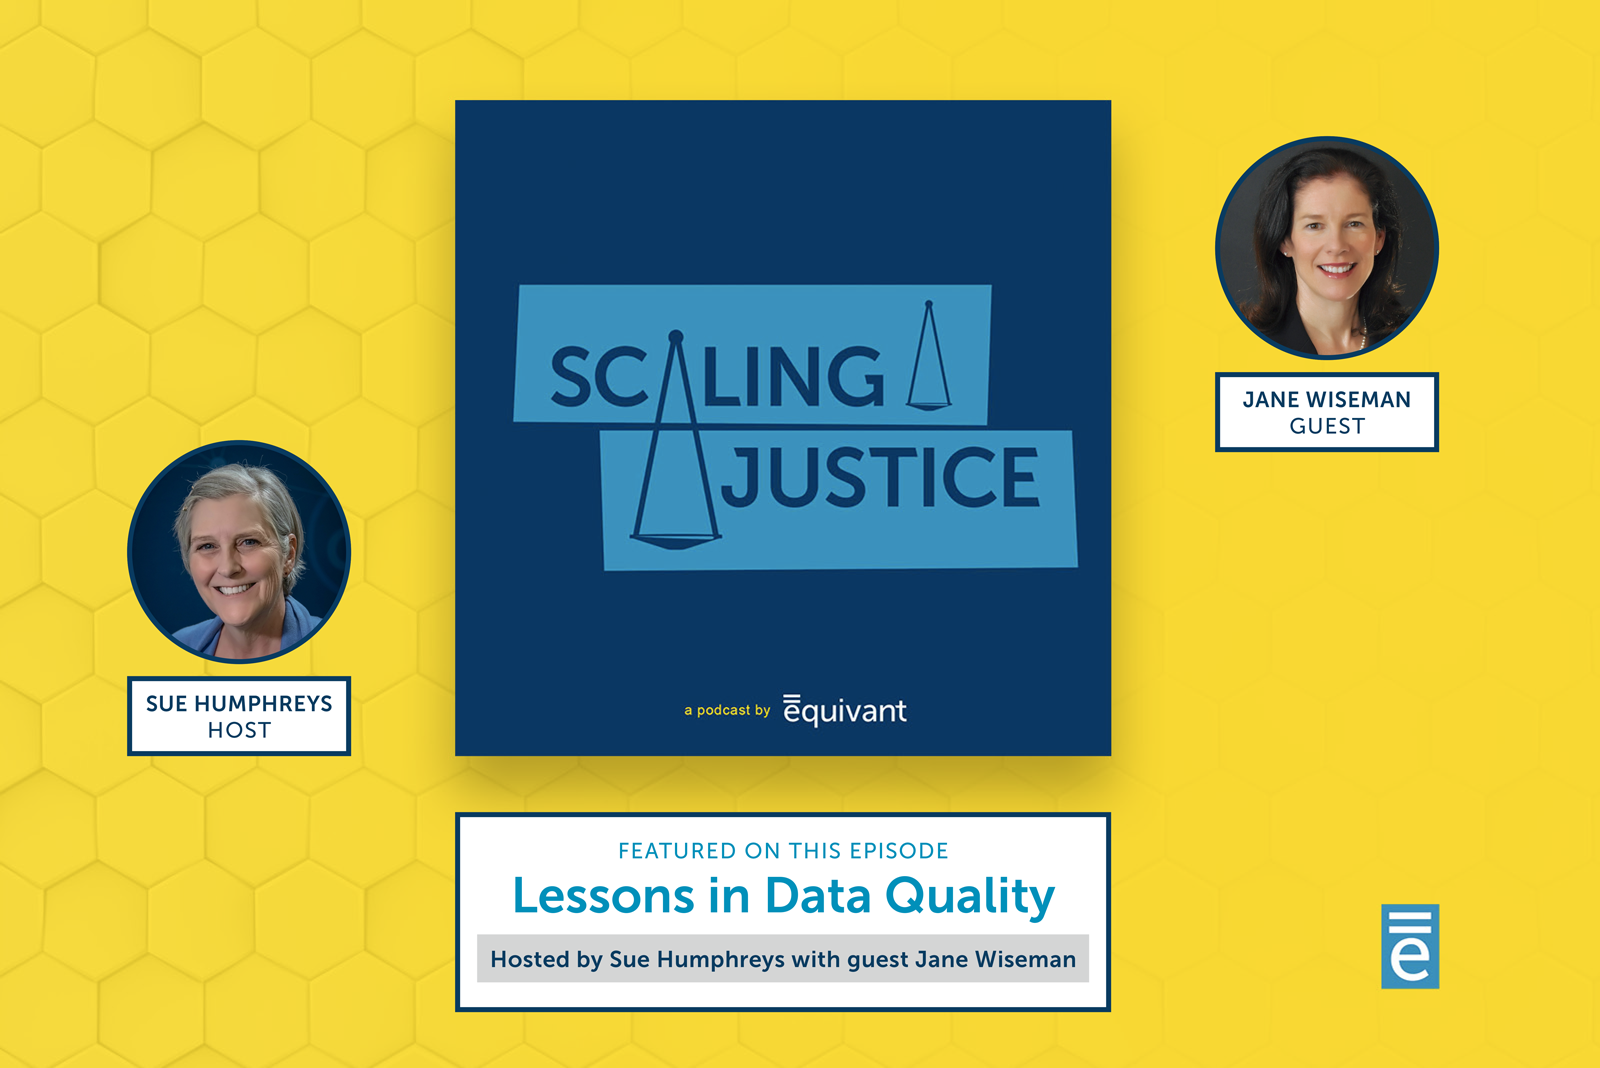 Scaling Justice: Lessons in Data Quality